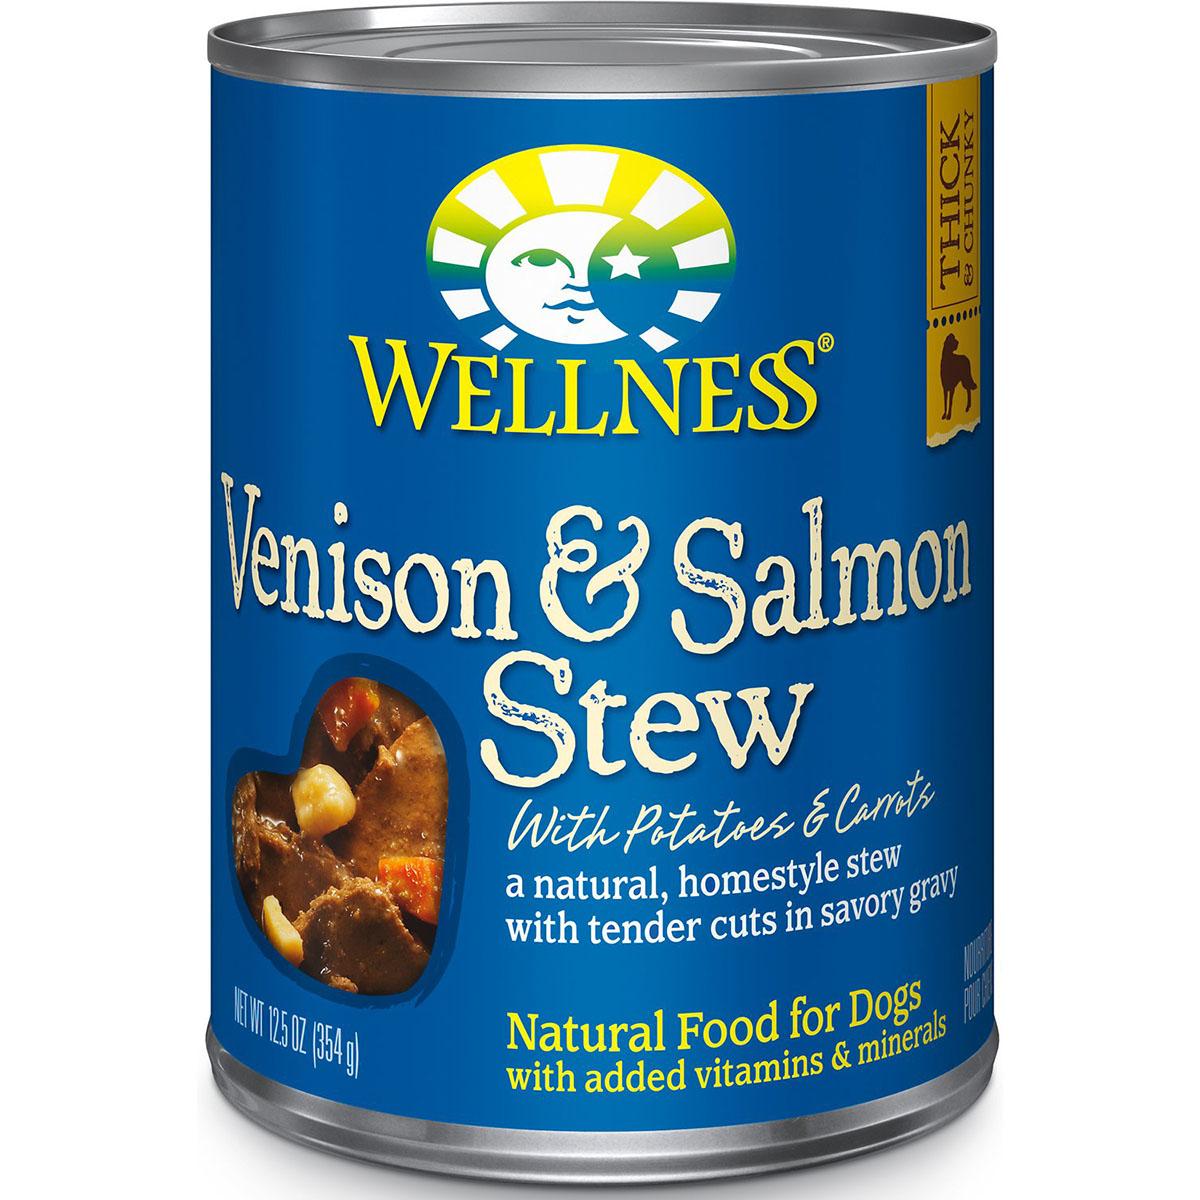 Wellness Venison & Salmon Stew with Potatoes & Carrots Canned Dog Food 